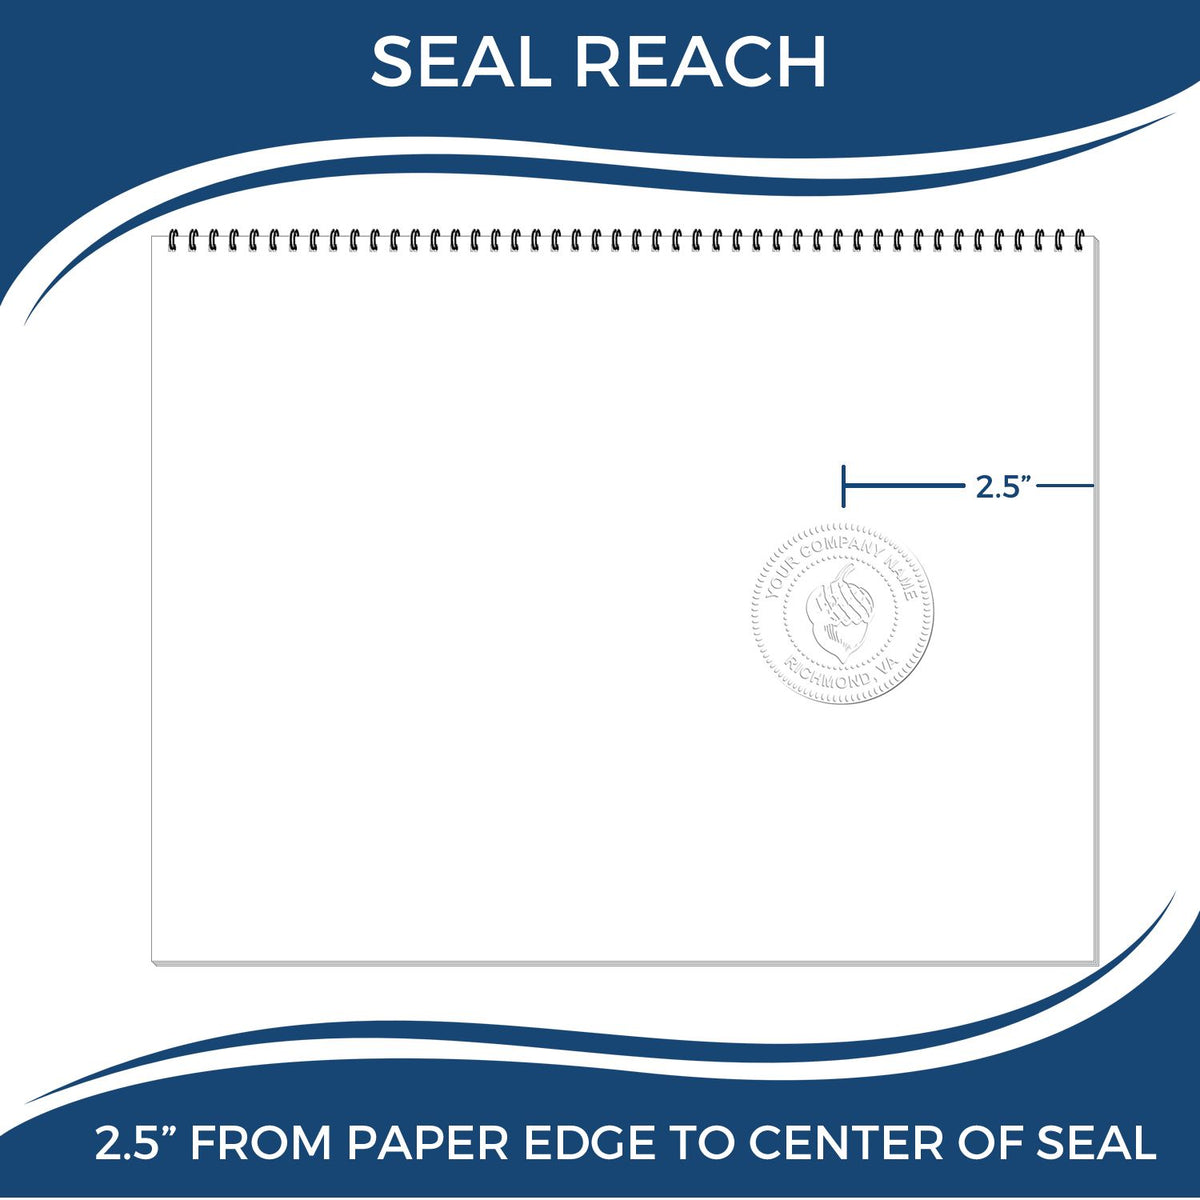 An infographic showing the seal reach which is represented by a ruler and a miniature seal image of the Heavy Duty Cast Iron New Hampshire Architect Embosser